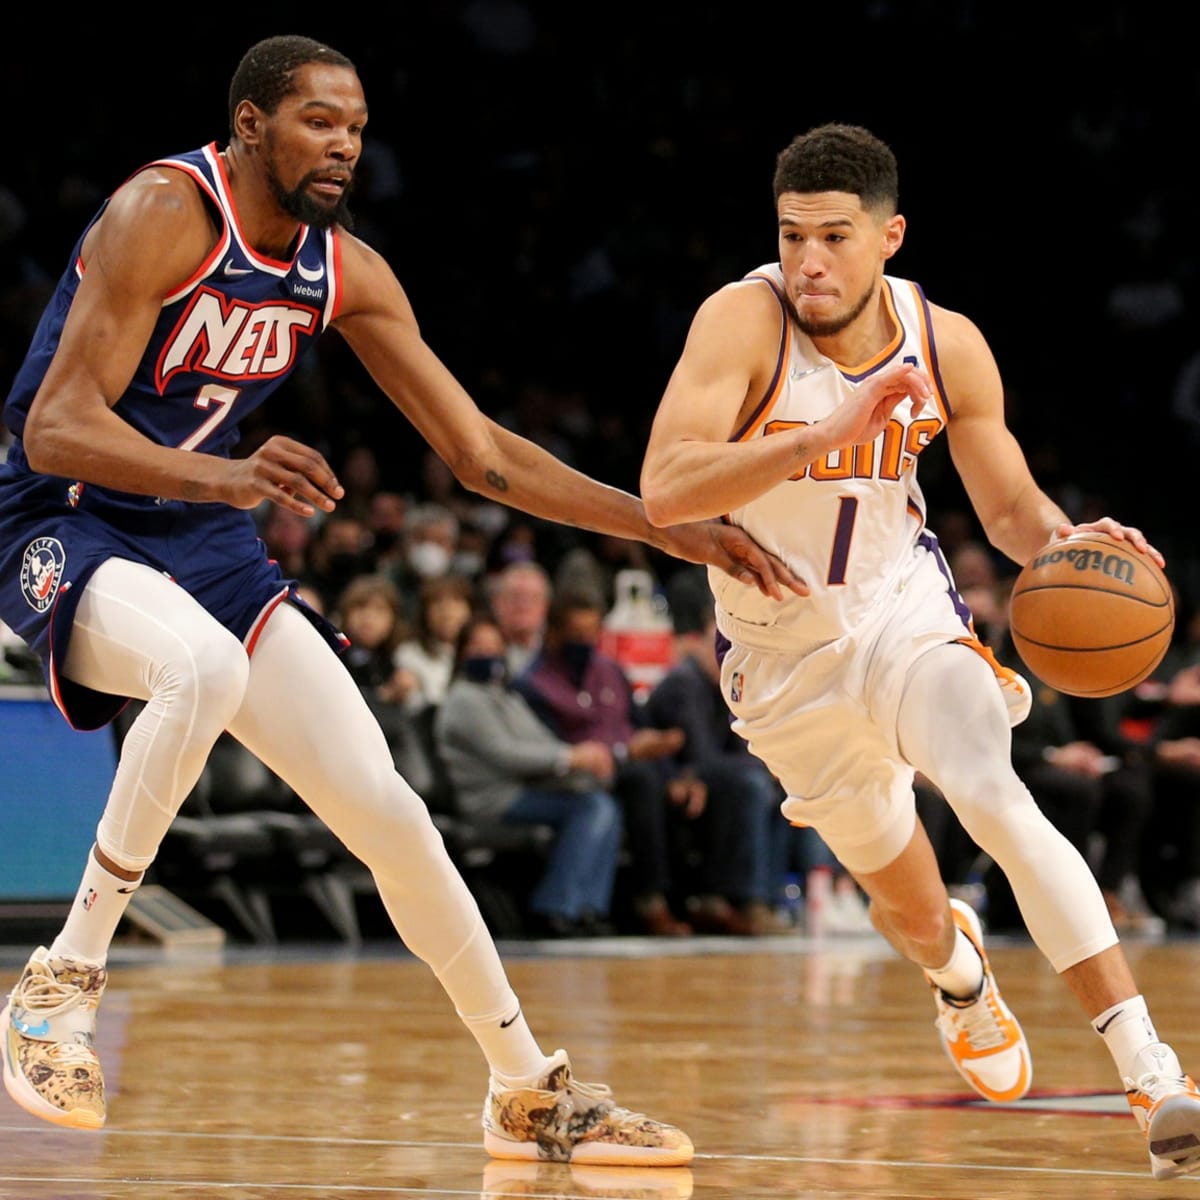 To get Kevin Durant and Devin Booker unstuck, Suns could turn to